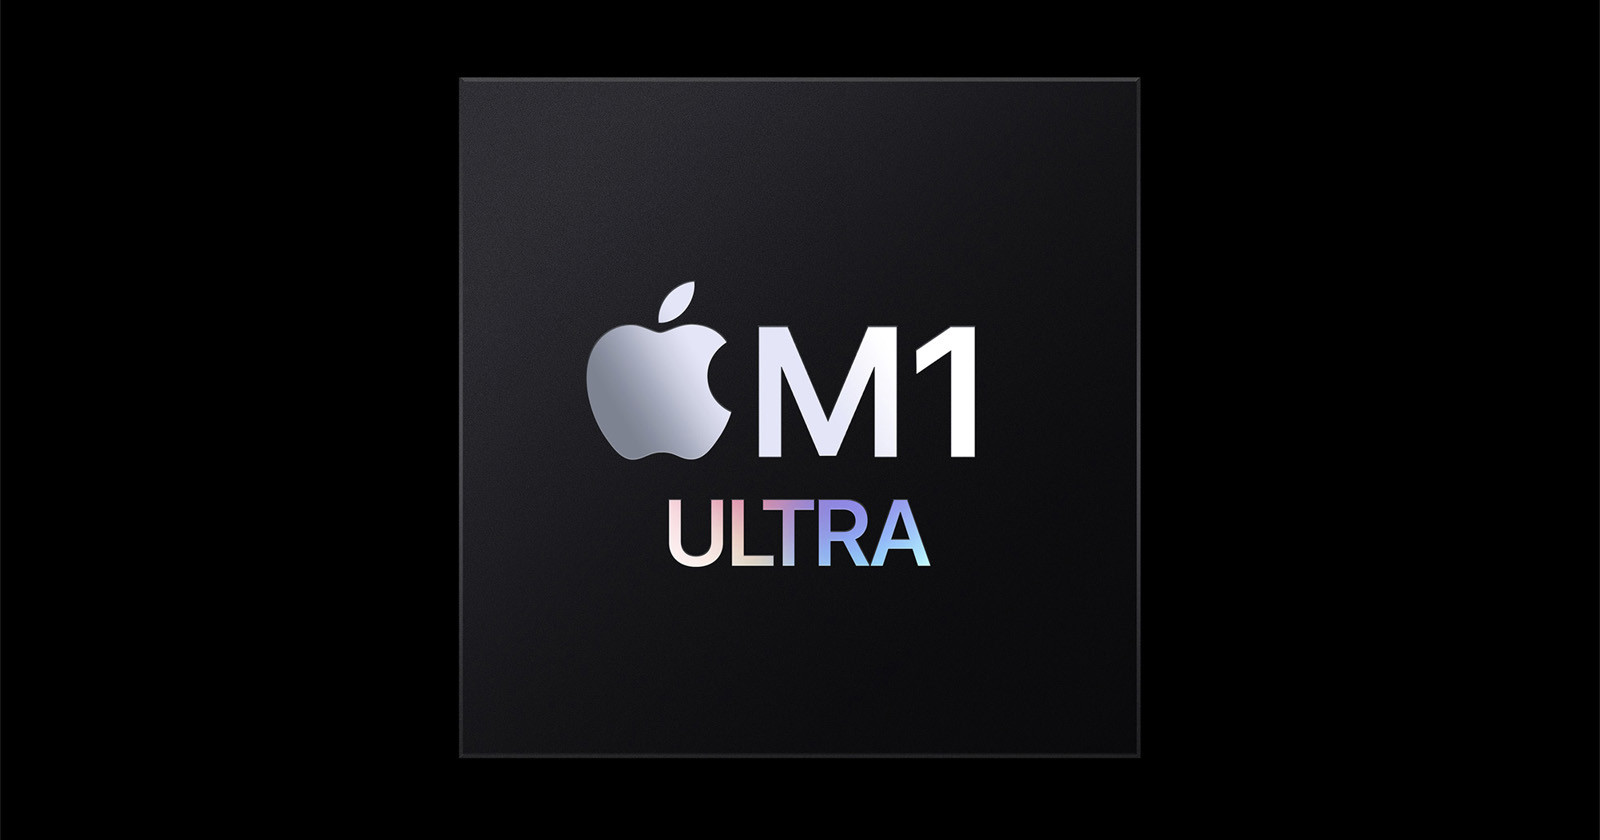 Apple Announces the Outrageously Powerful M1 Ultra Chip